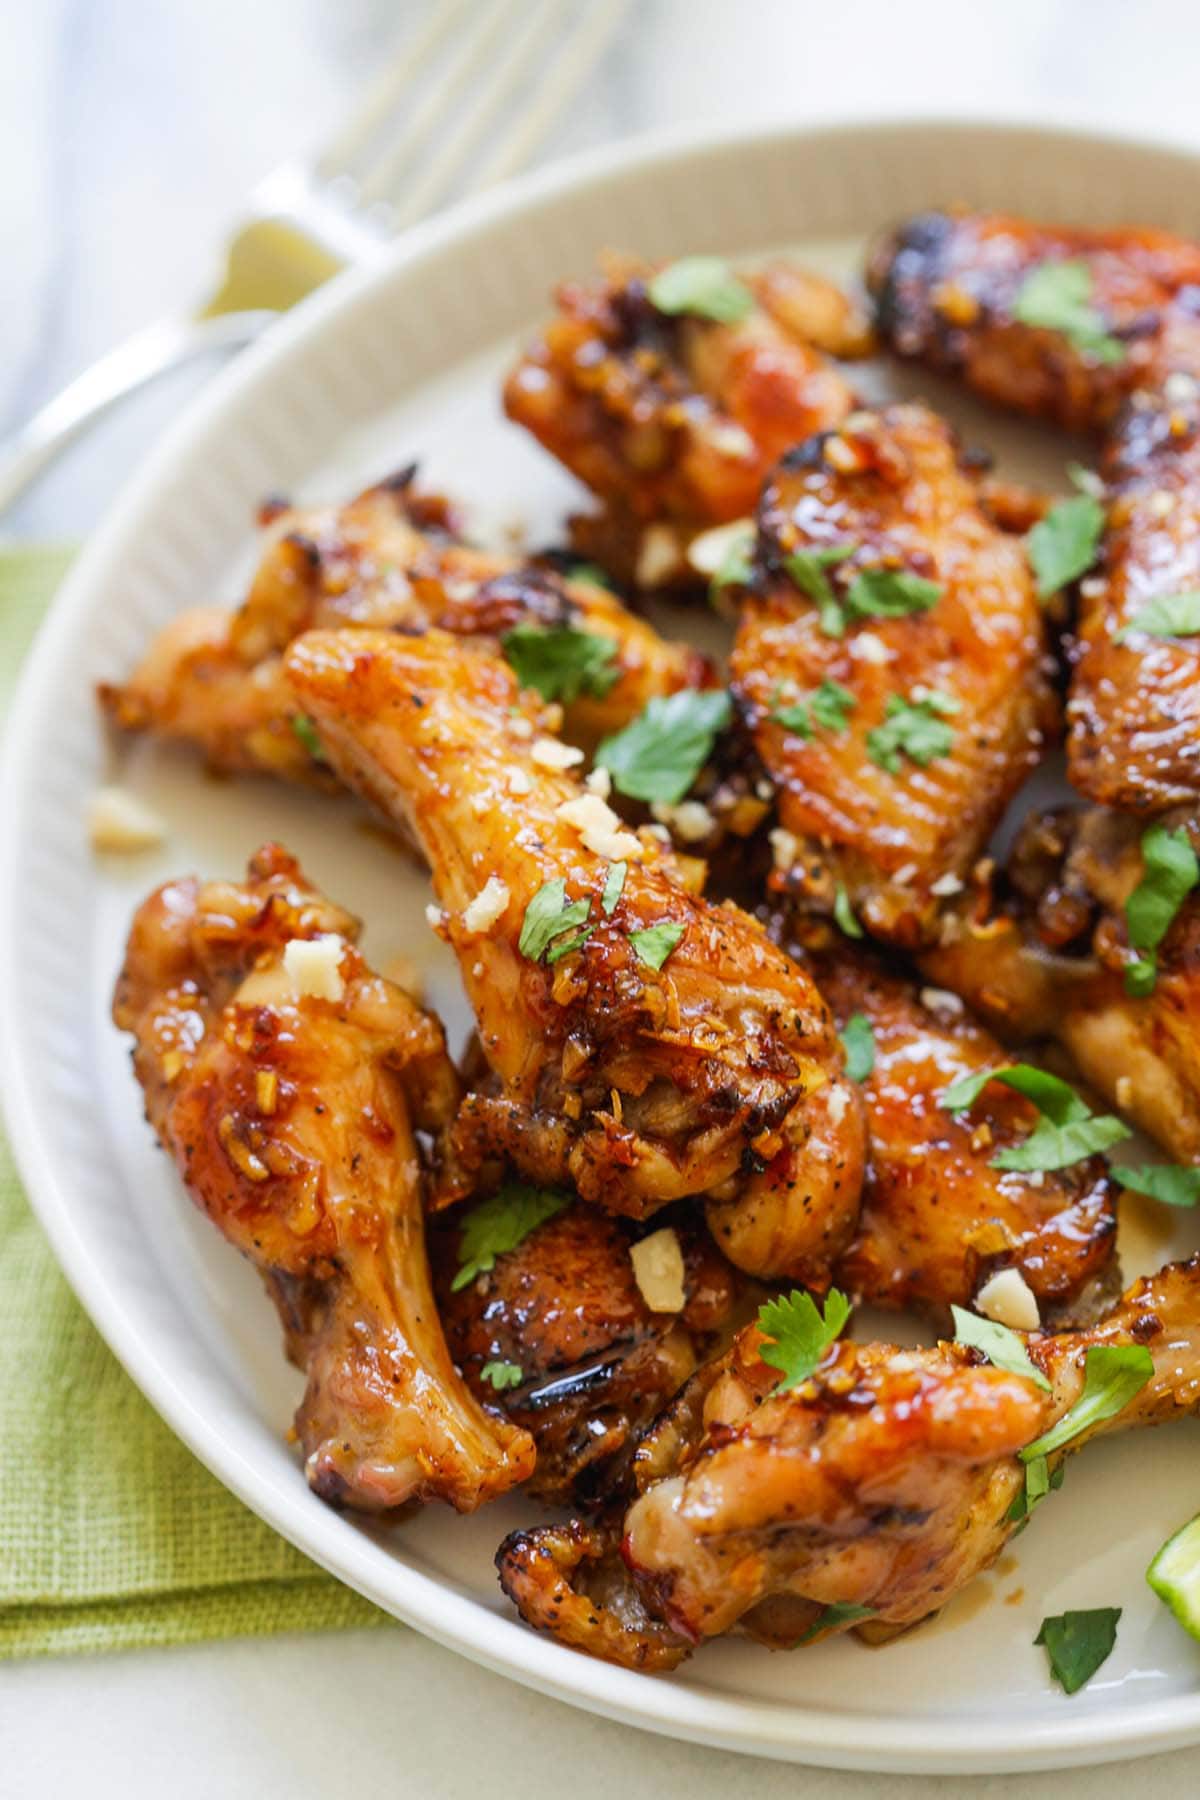 Easy and quick Asian goma chicken wings recipe.